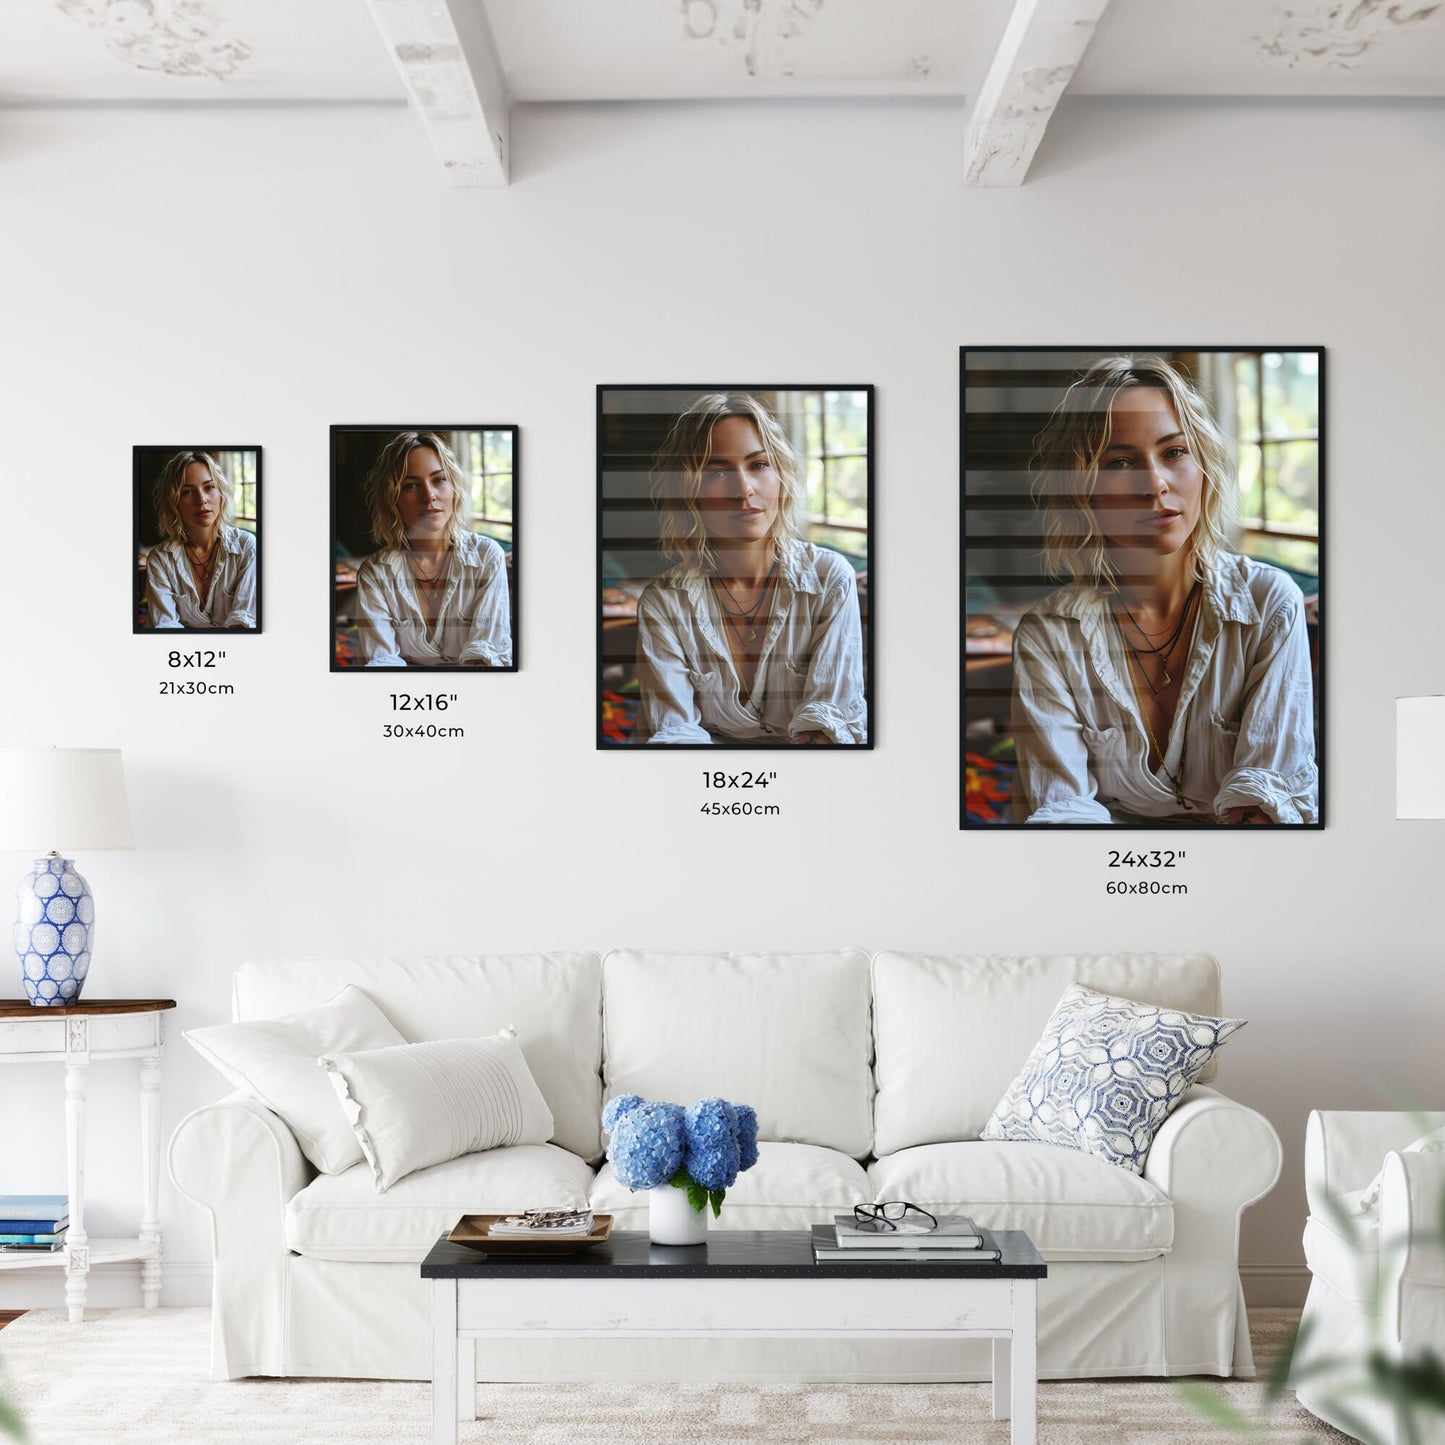 A Poster of A well-lit room with neutral-colored walls - A Woman With Blonde Hair Wearing A White Shirt Default Title